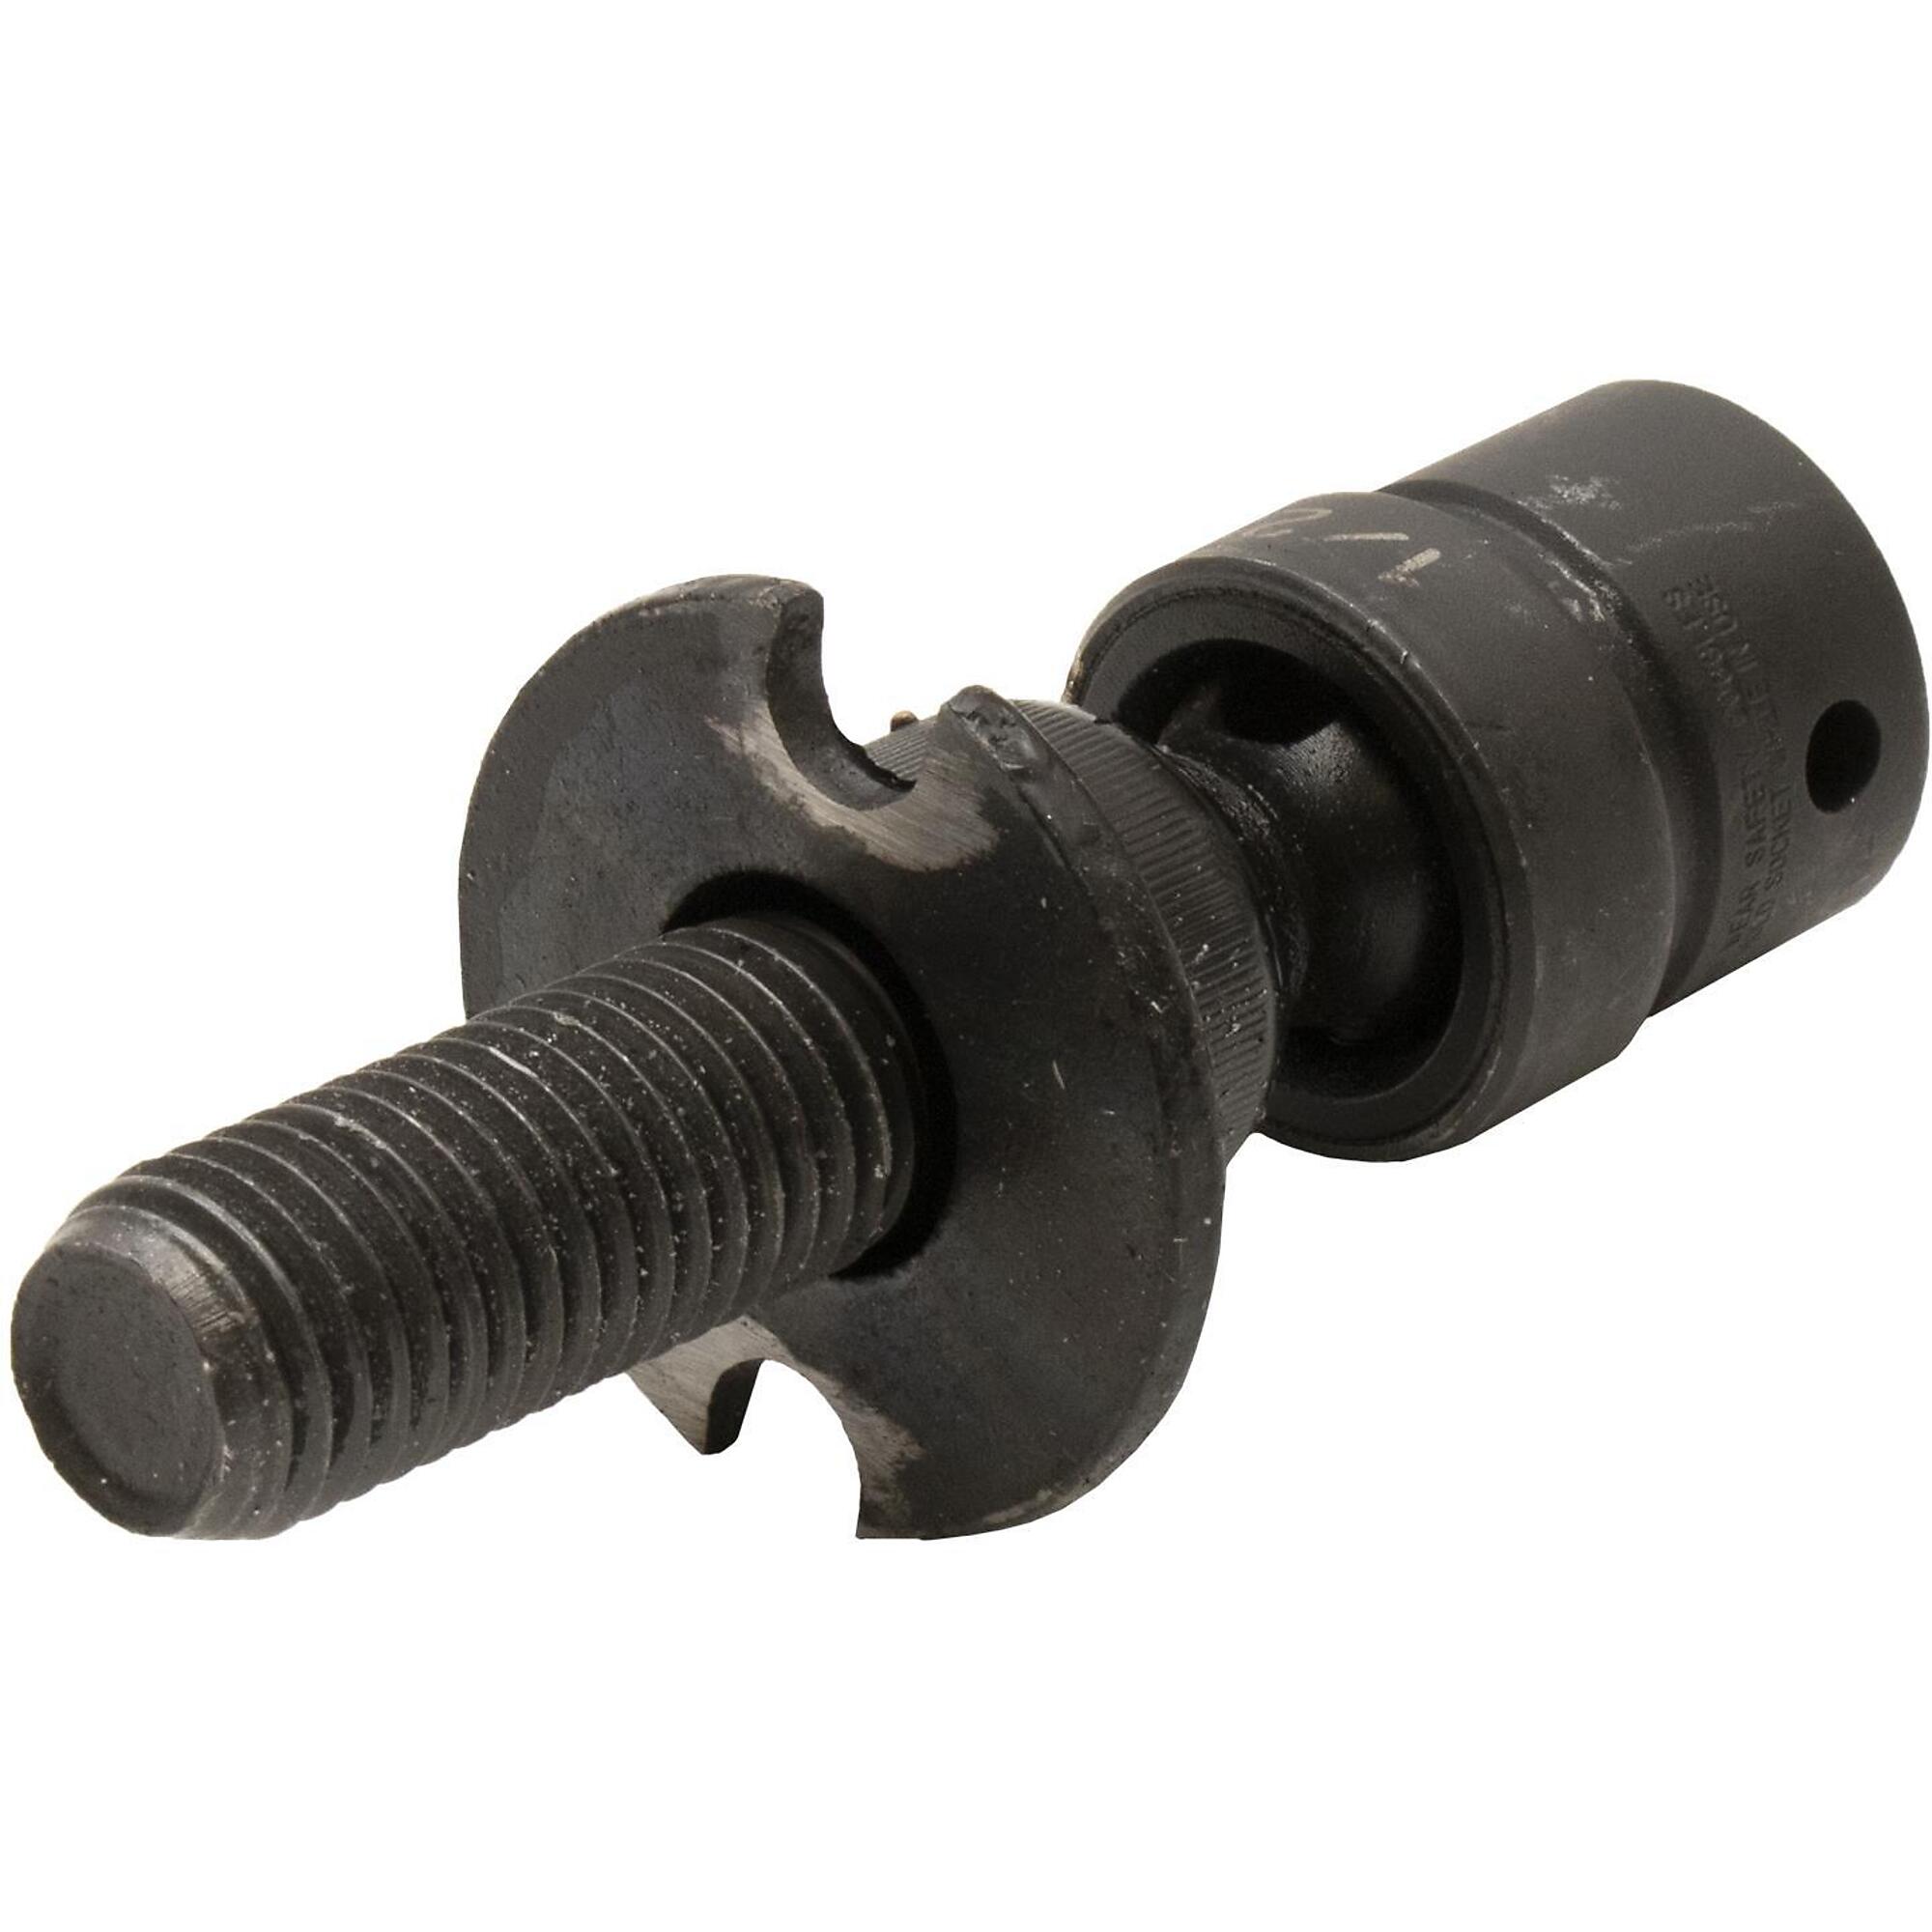 Marshalltown Live End Replacement Universal Joint, Model SPNLER